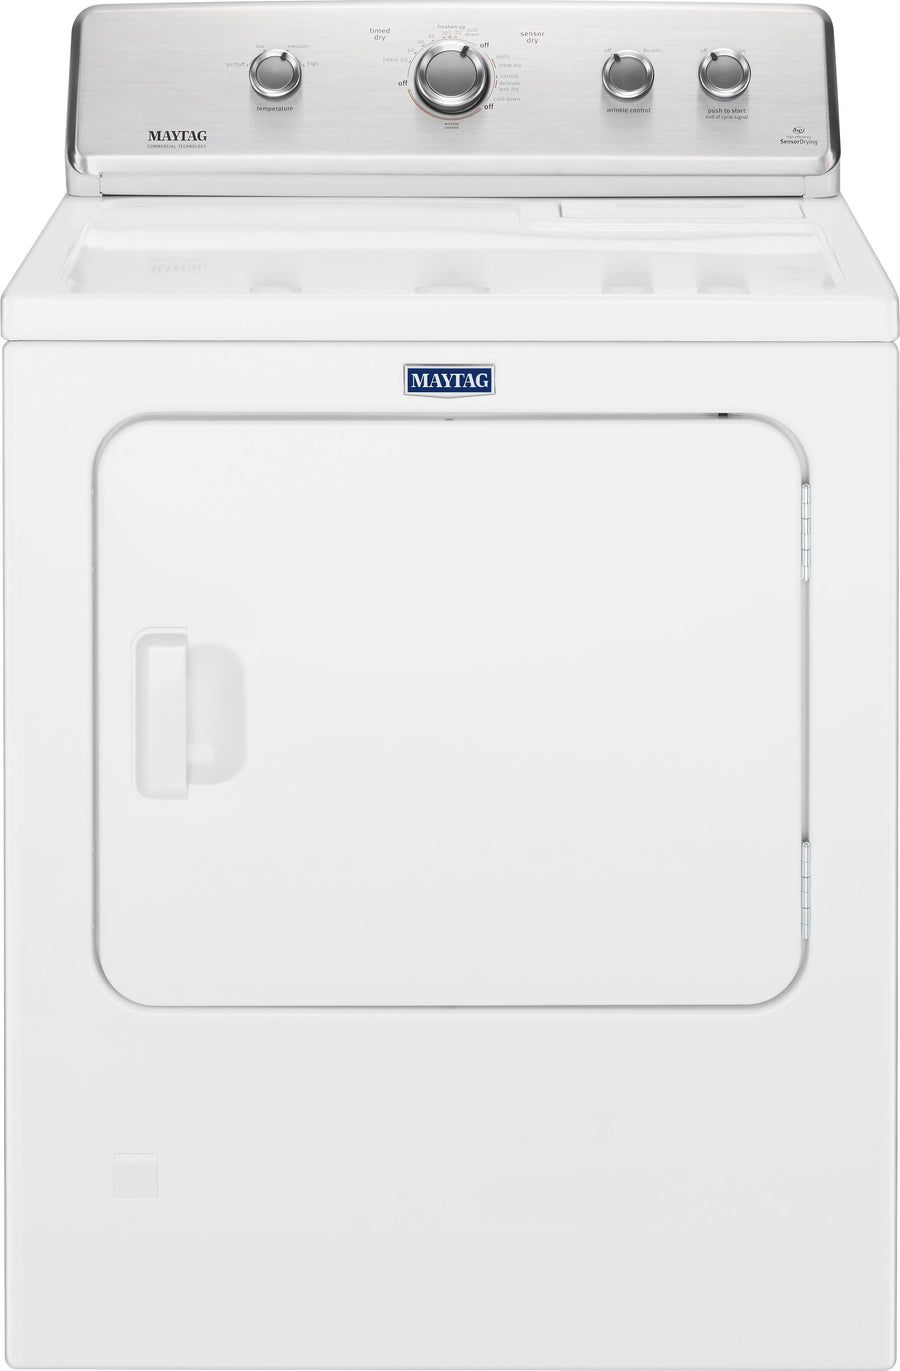 Maytag - 7 Cu. Ft. Electric Dryer with Wrinkle Control Option - White_0